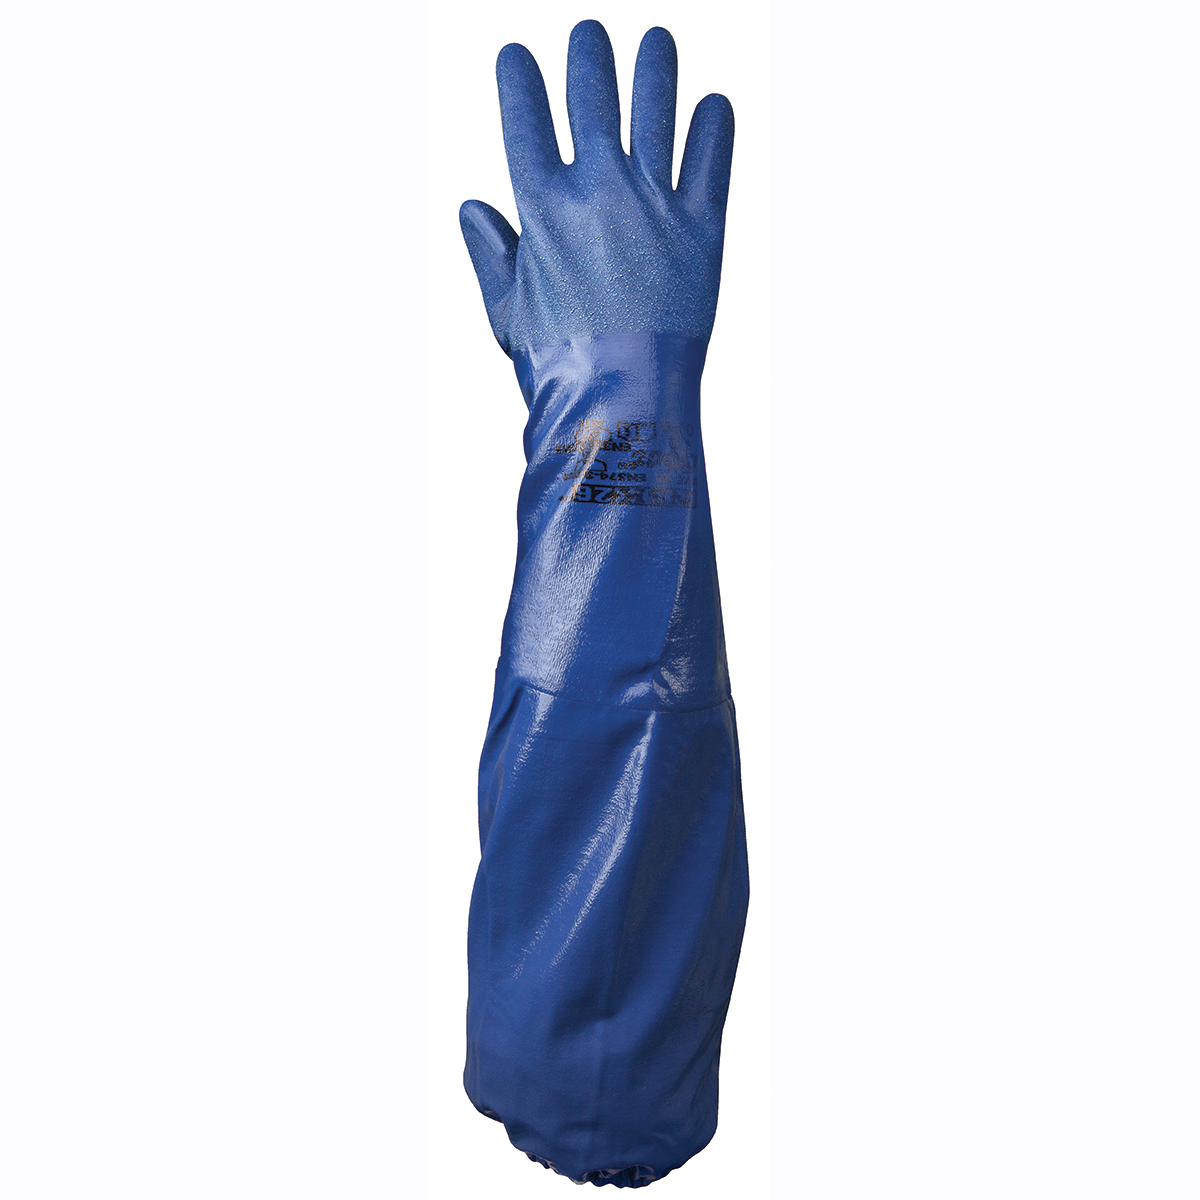 SHOWA® Size 11 Blue Cotton Lined Nitrile Chemical Resistant Gloves